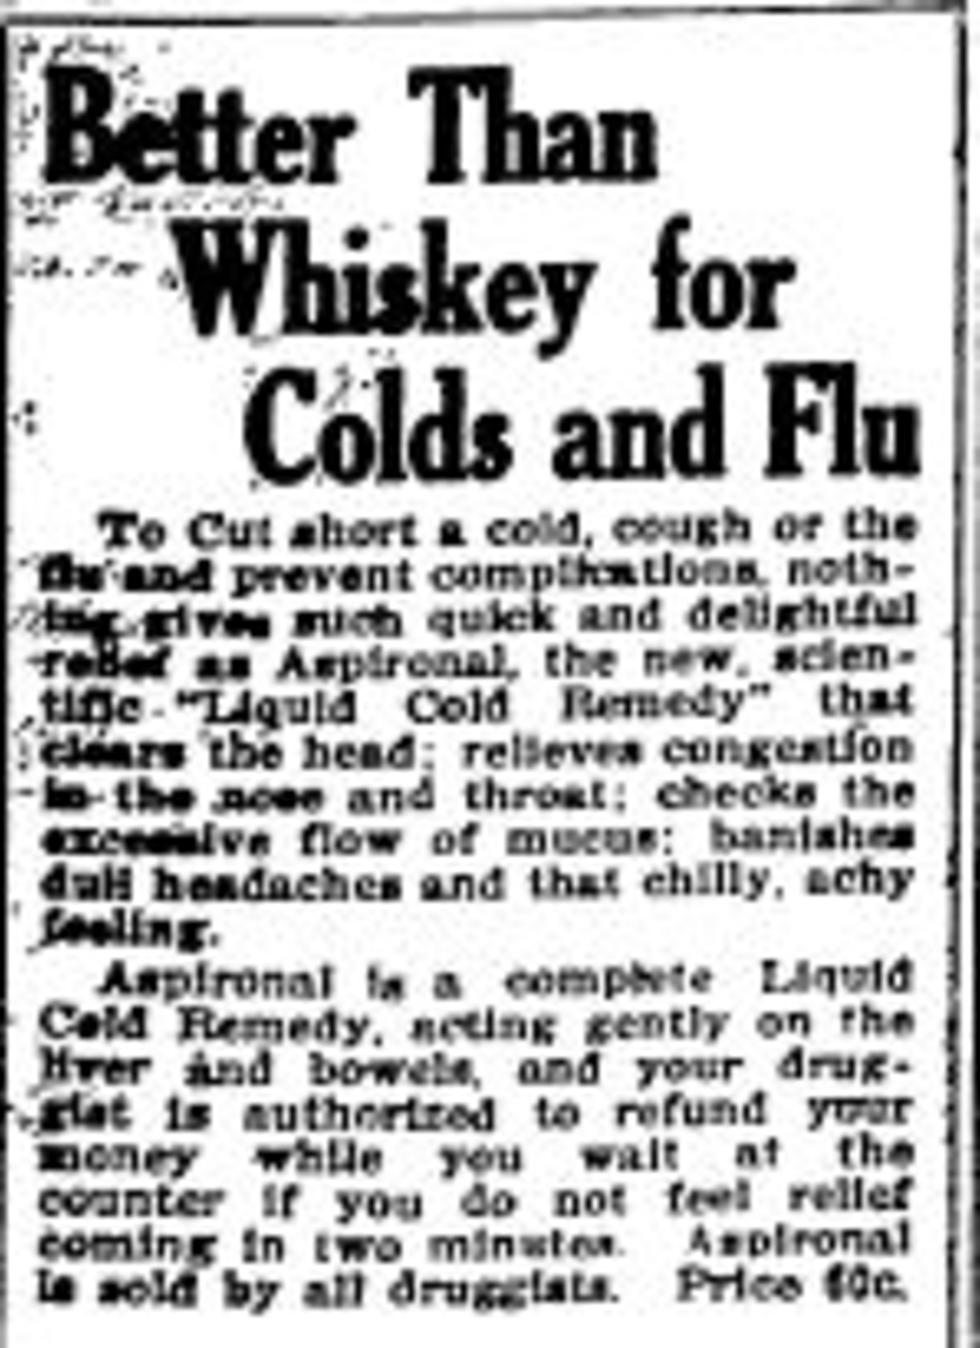 Harmon’s Histories: Elixirs promised better relief from cold, flu than whiskey